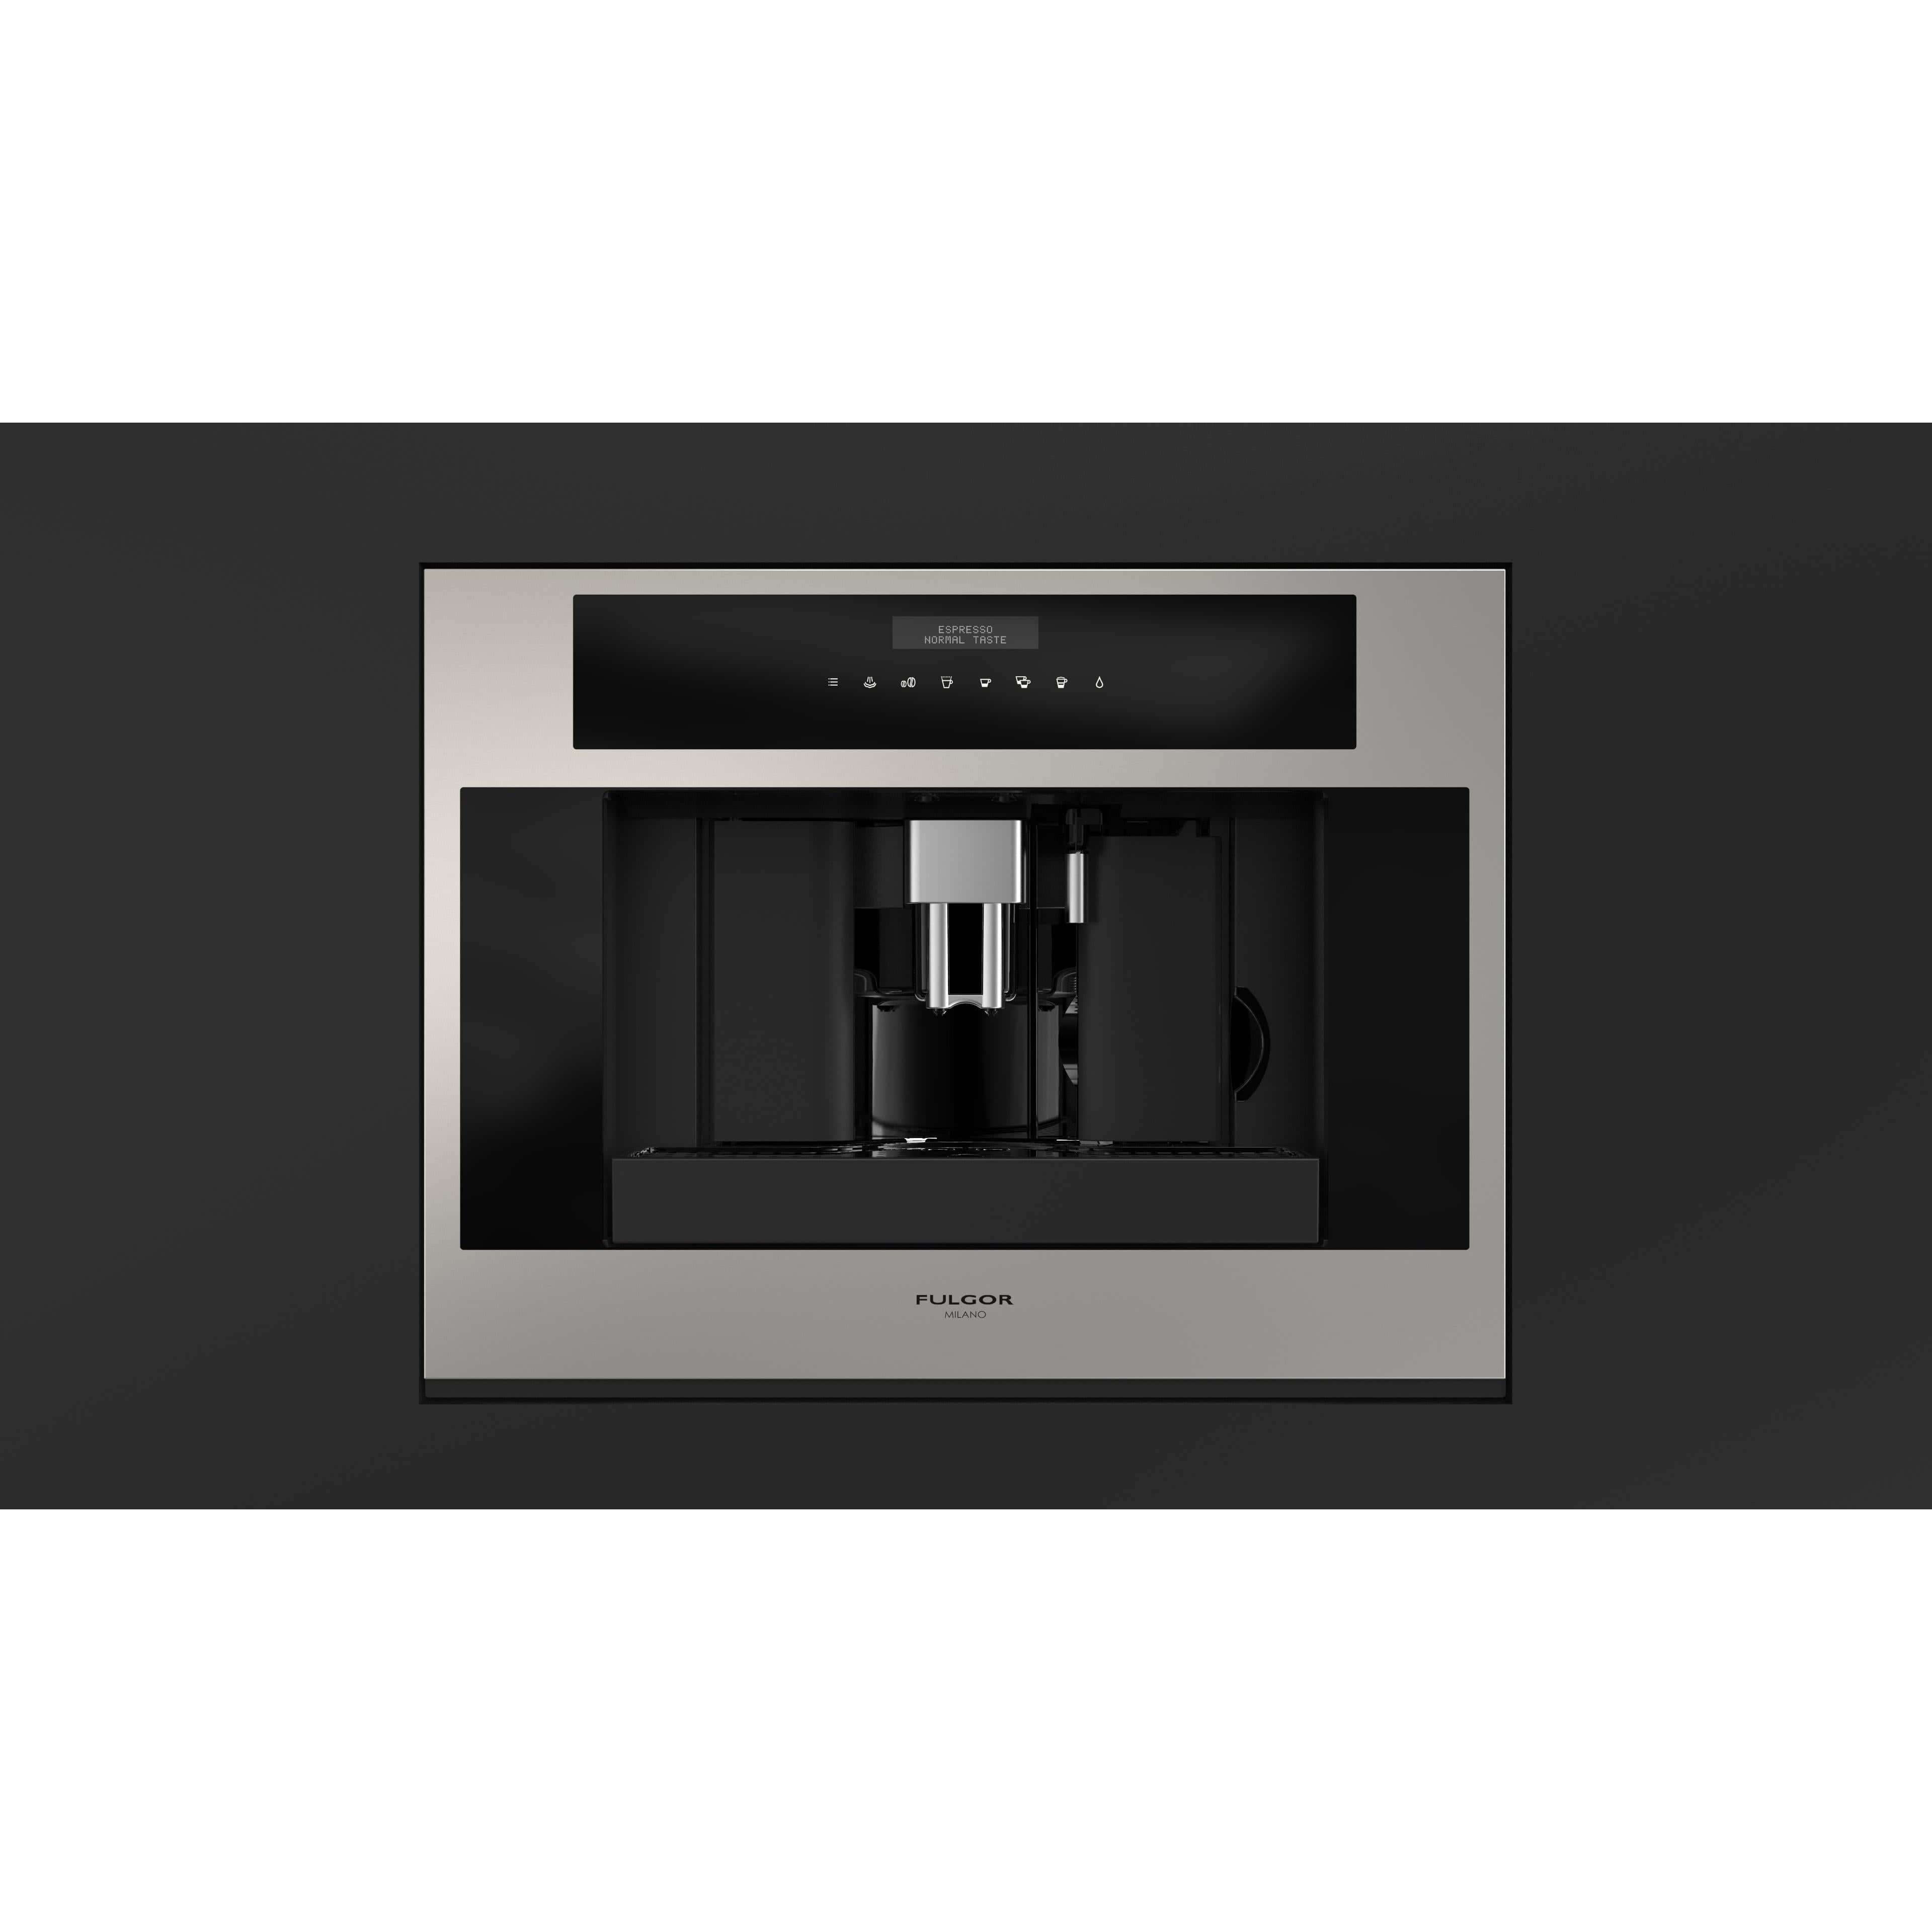 Fulgor Milano 24" Built-In Fully Automatic Coffee Machine, Stainless Steel - F7BC24S1 Coffee Machine F7BC24S1 Luxury Appliances Direct